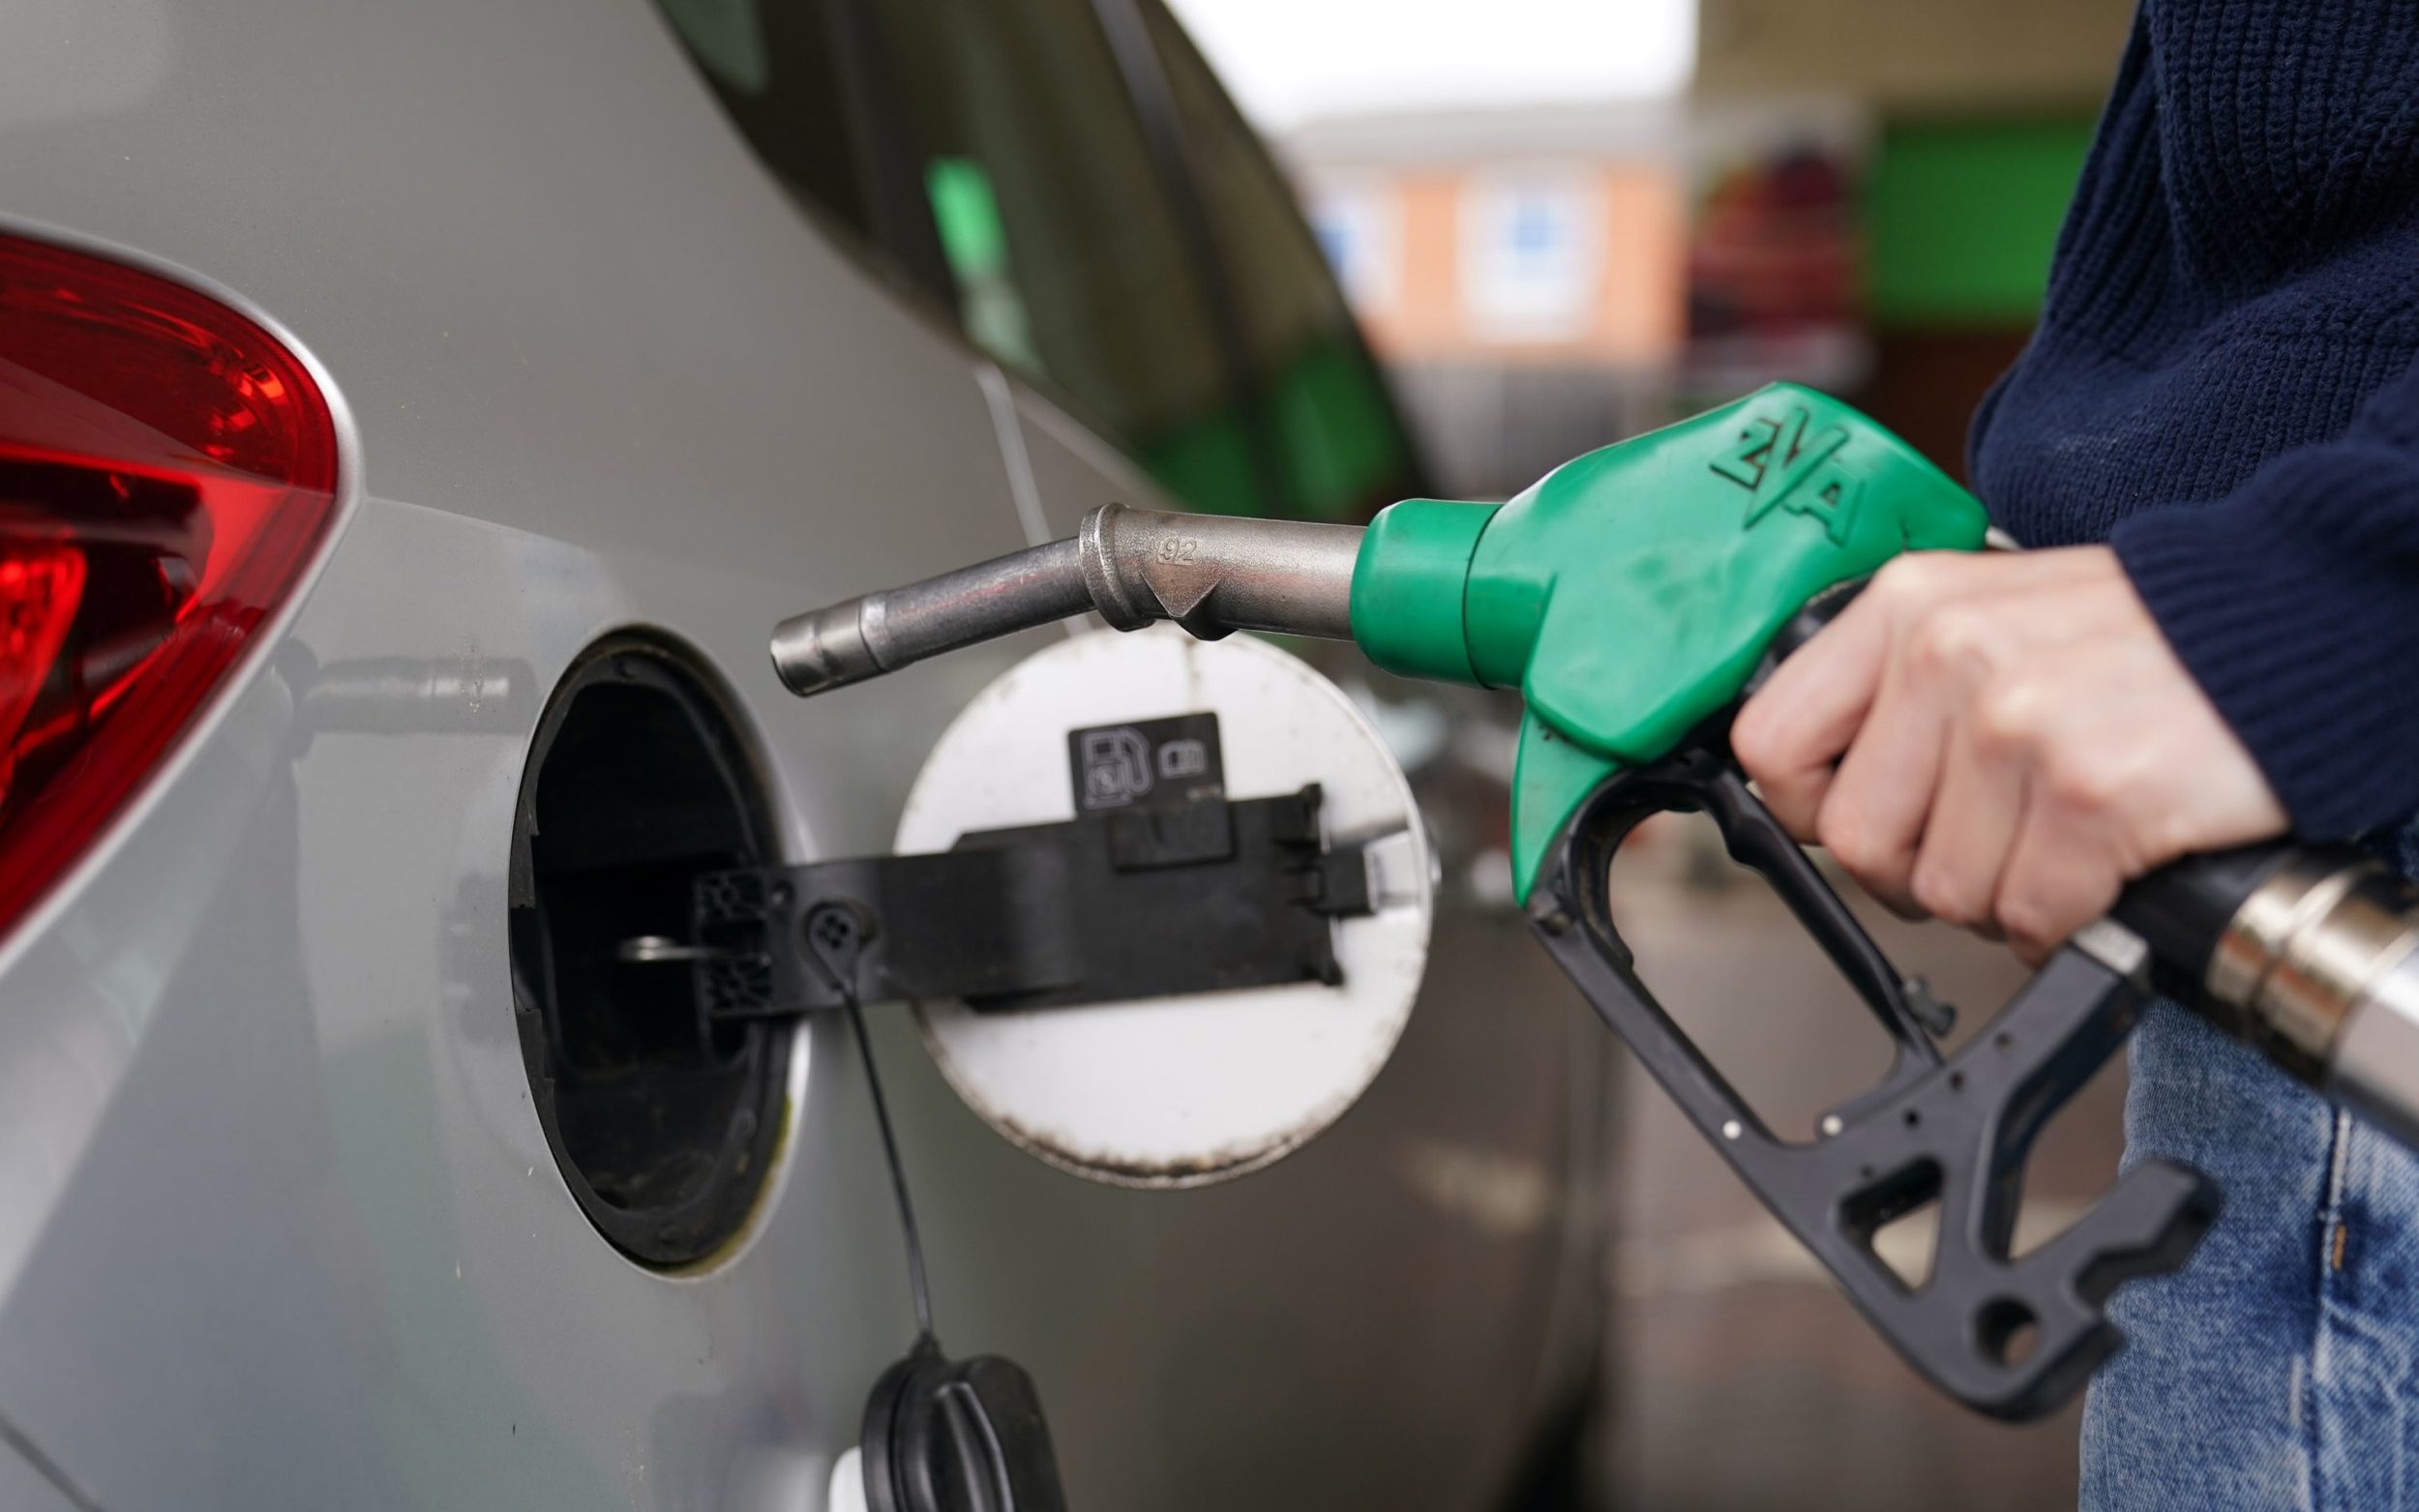 drivers still being overcharged for fuel, watchdog finds